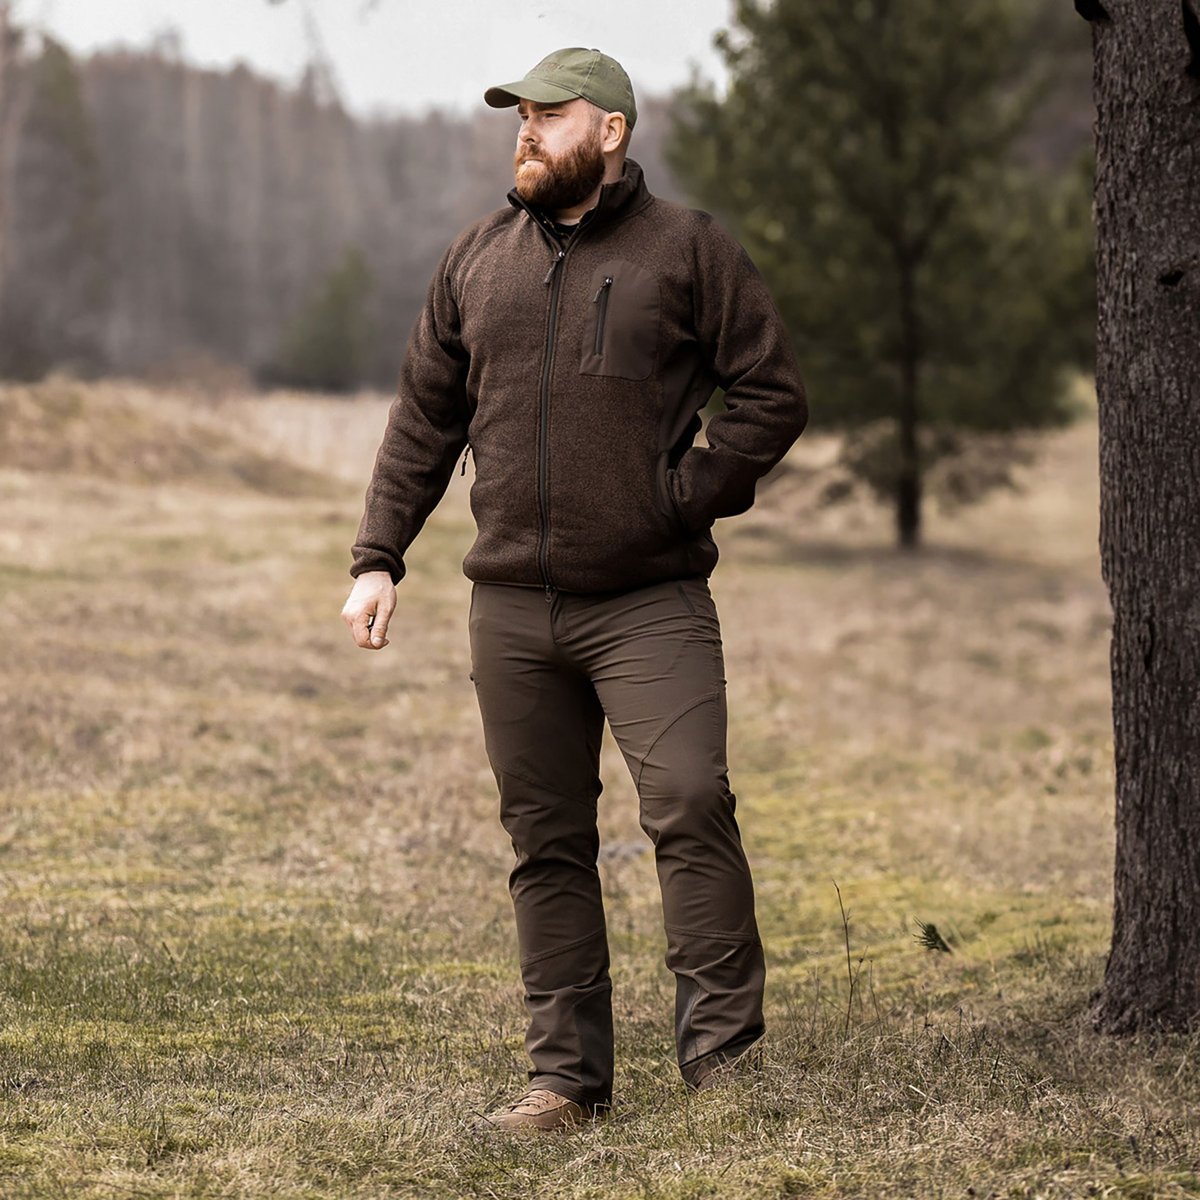 News: Jack Pyke Weardale Knitted Jacket Back At Military 1st

The Jack Pyke Weardale Knitted Jacket is in stock again at Military 1st... 

Read the full story: popularairsoft.com/news/jack-pyke… #airsoft